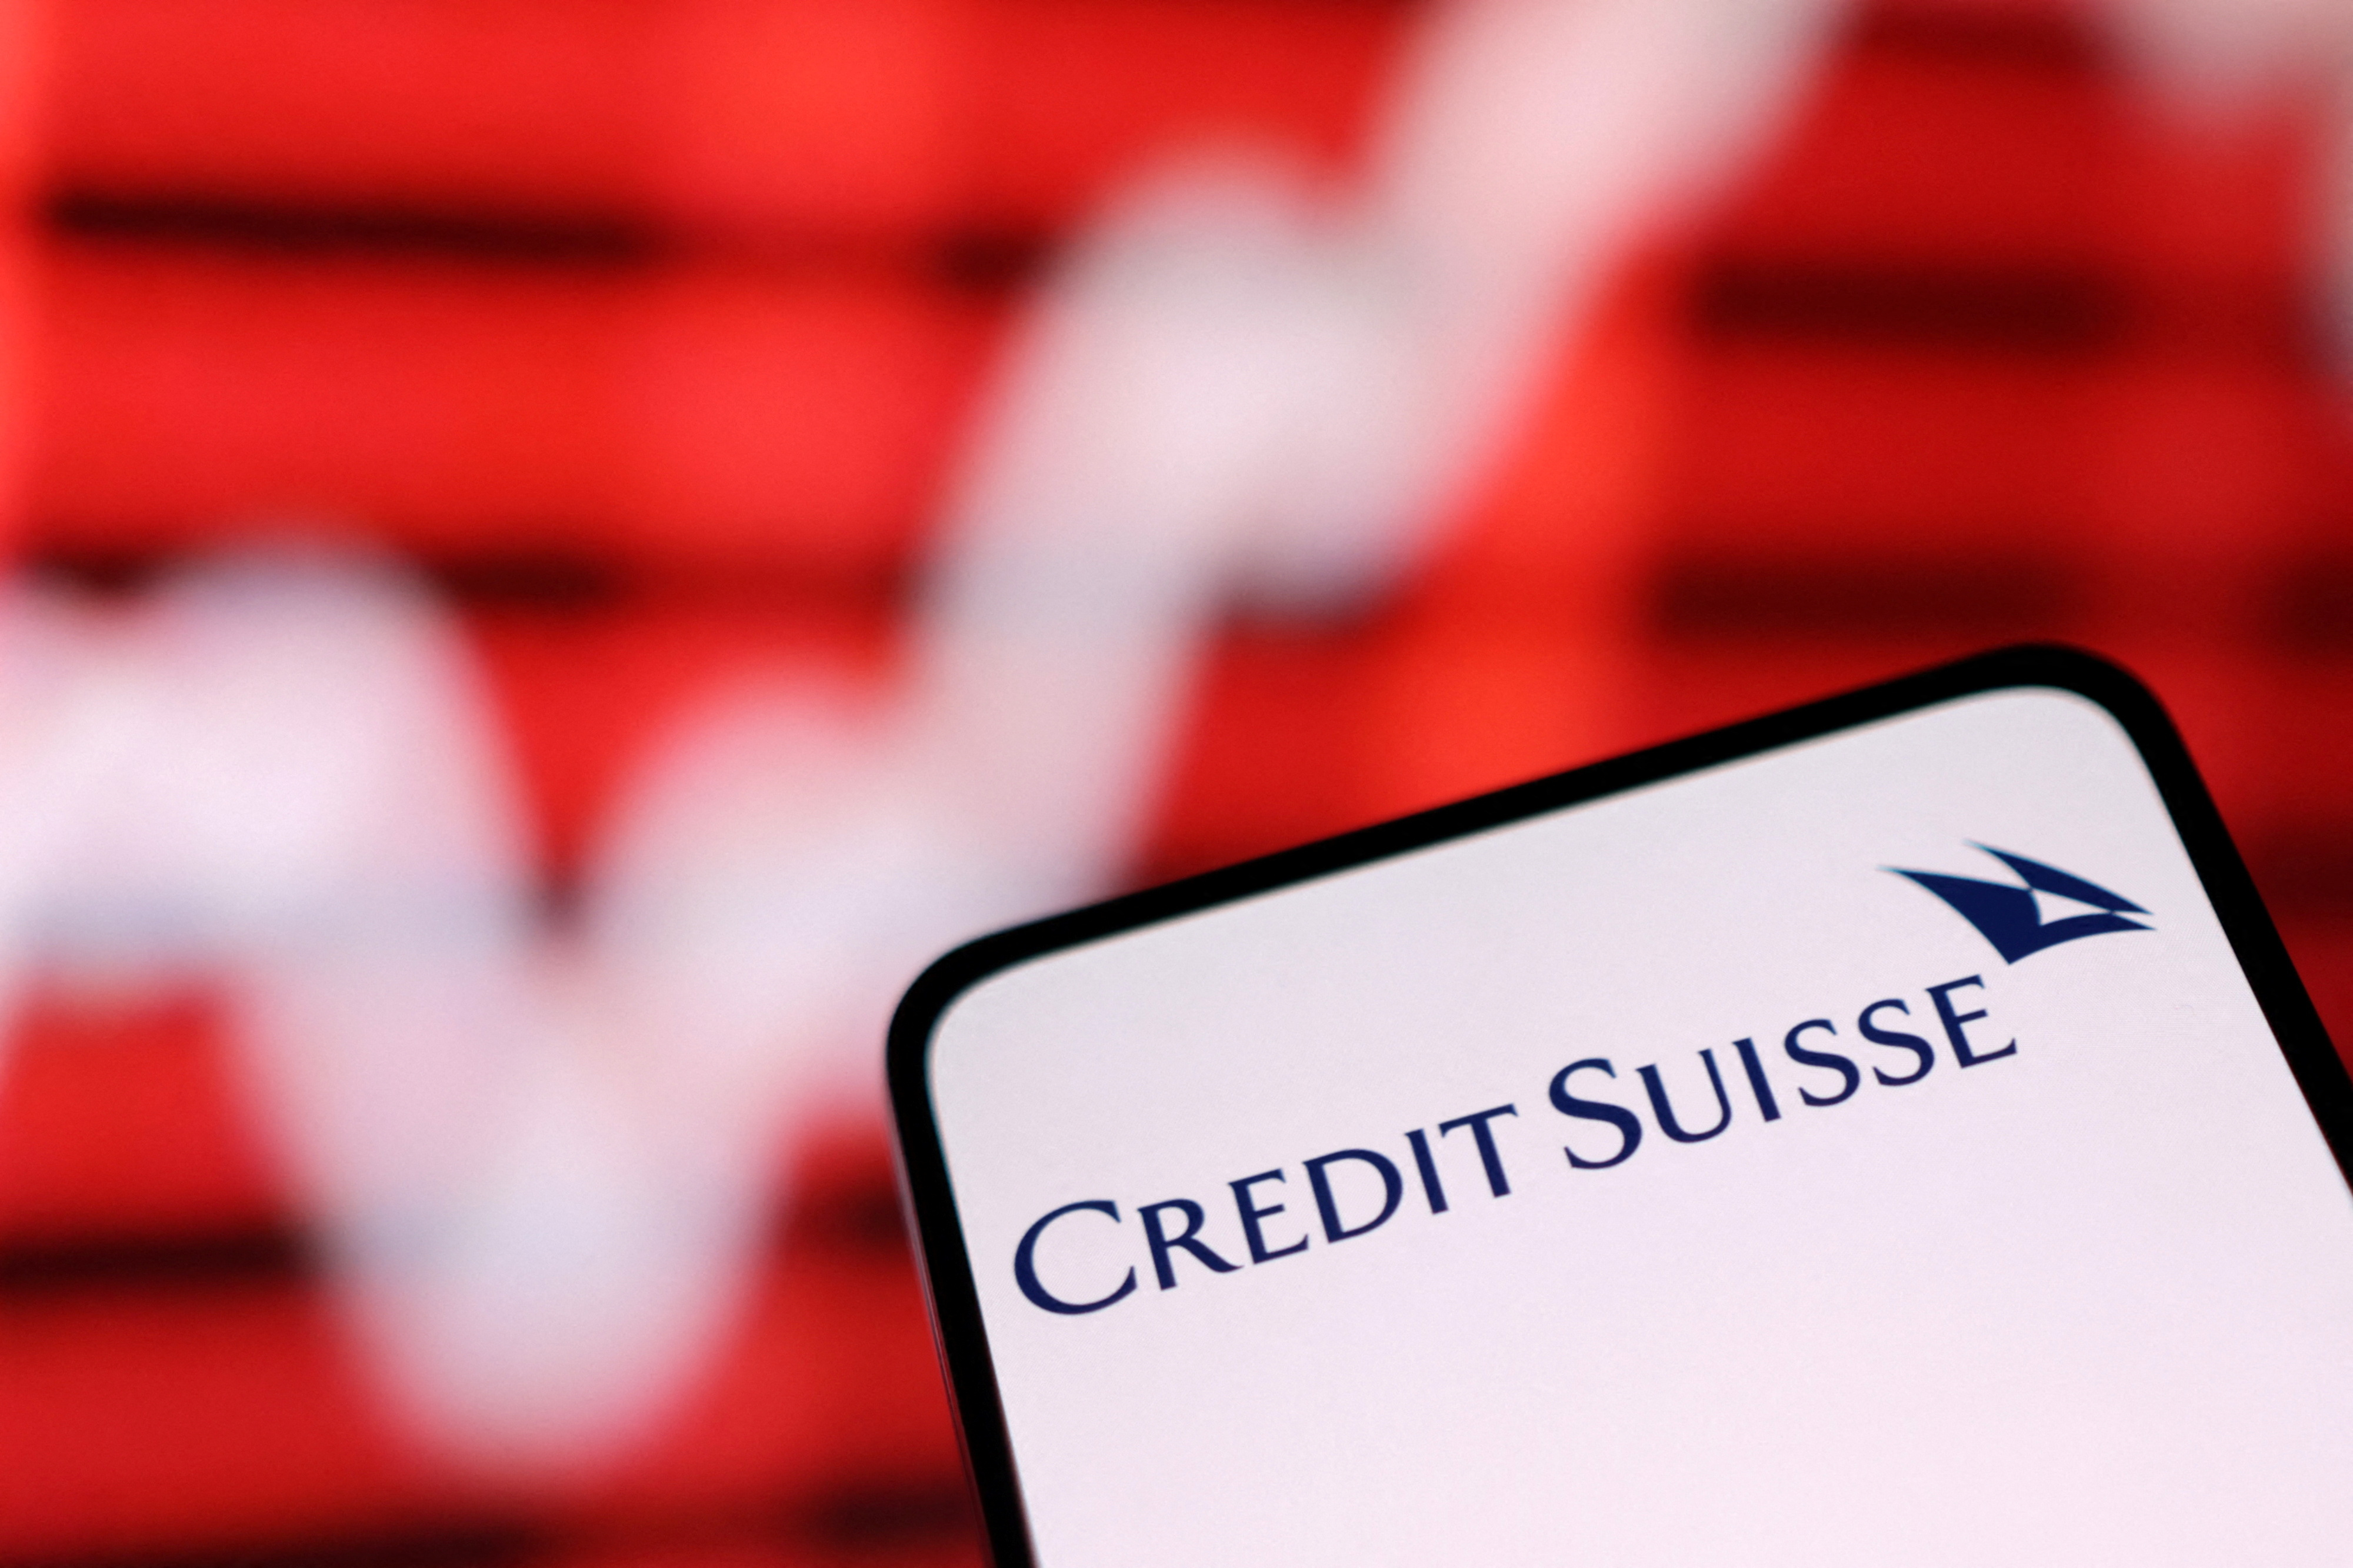 Illustration shows Credit Suisse logo and rising stock graph